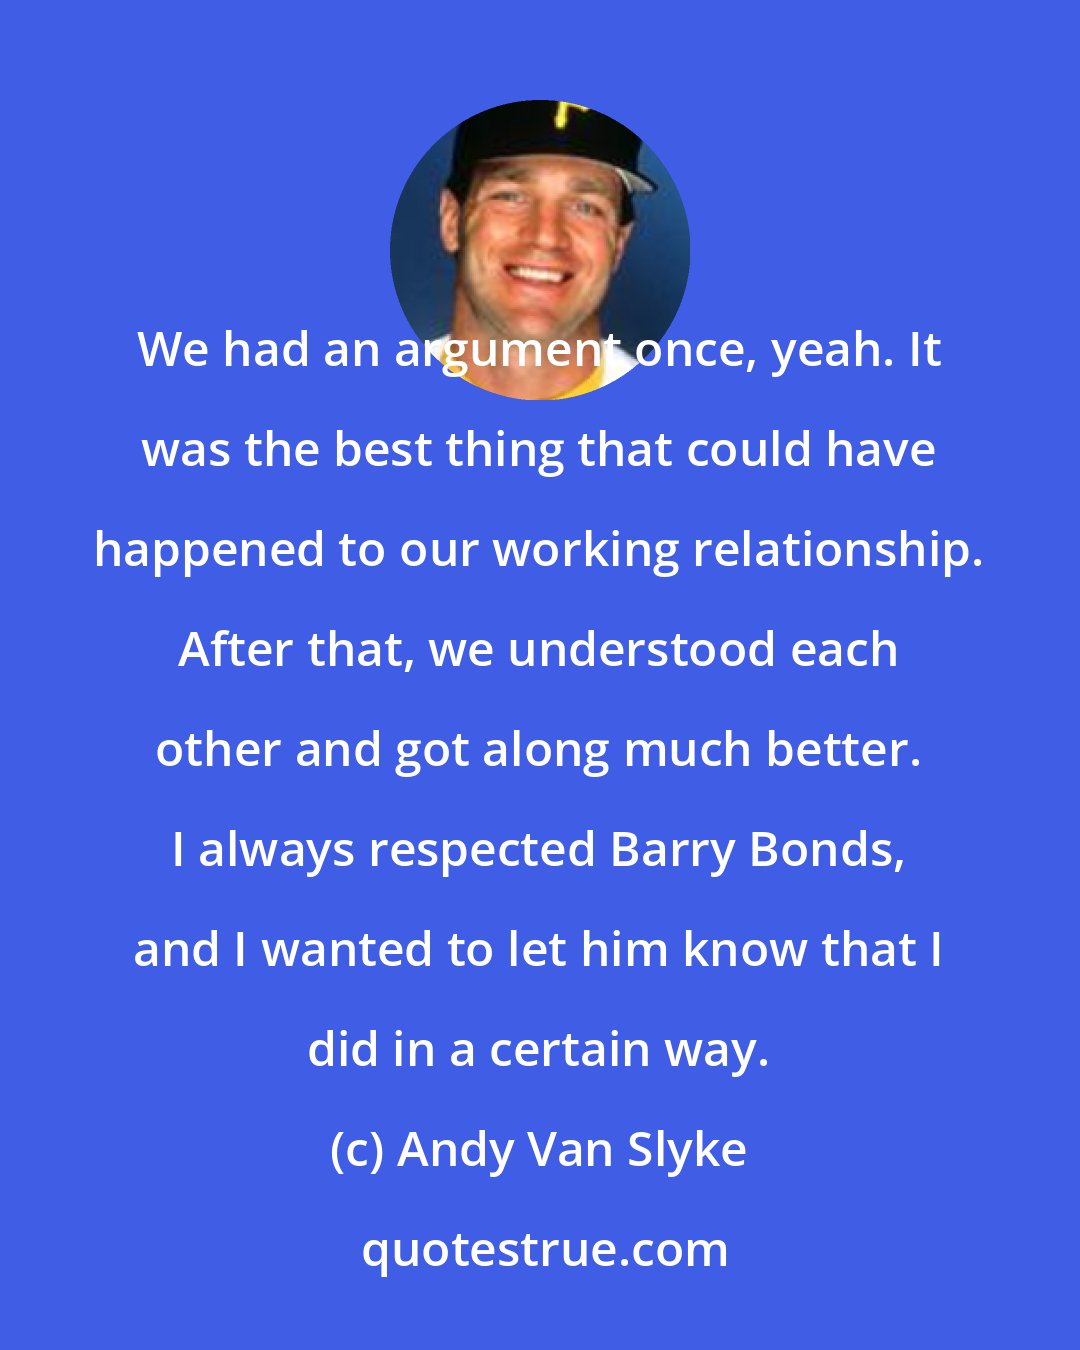 Andy Van Slyke: We had an argument once, yeah. It was the best thing that could have happened to our working relationship. After that, we understood each other and got along much better. I always respected Barry Bonds, and I wanted to let him know that I did in a certain way.